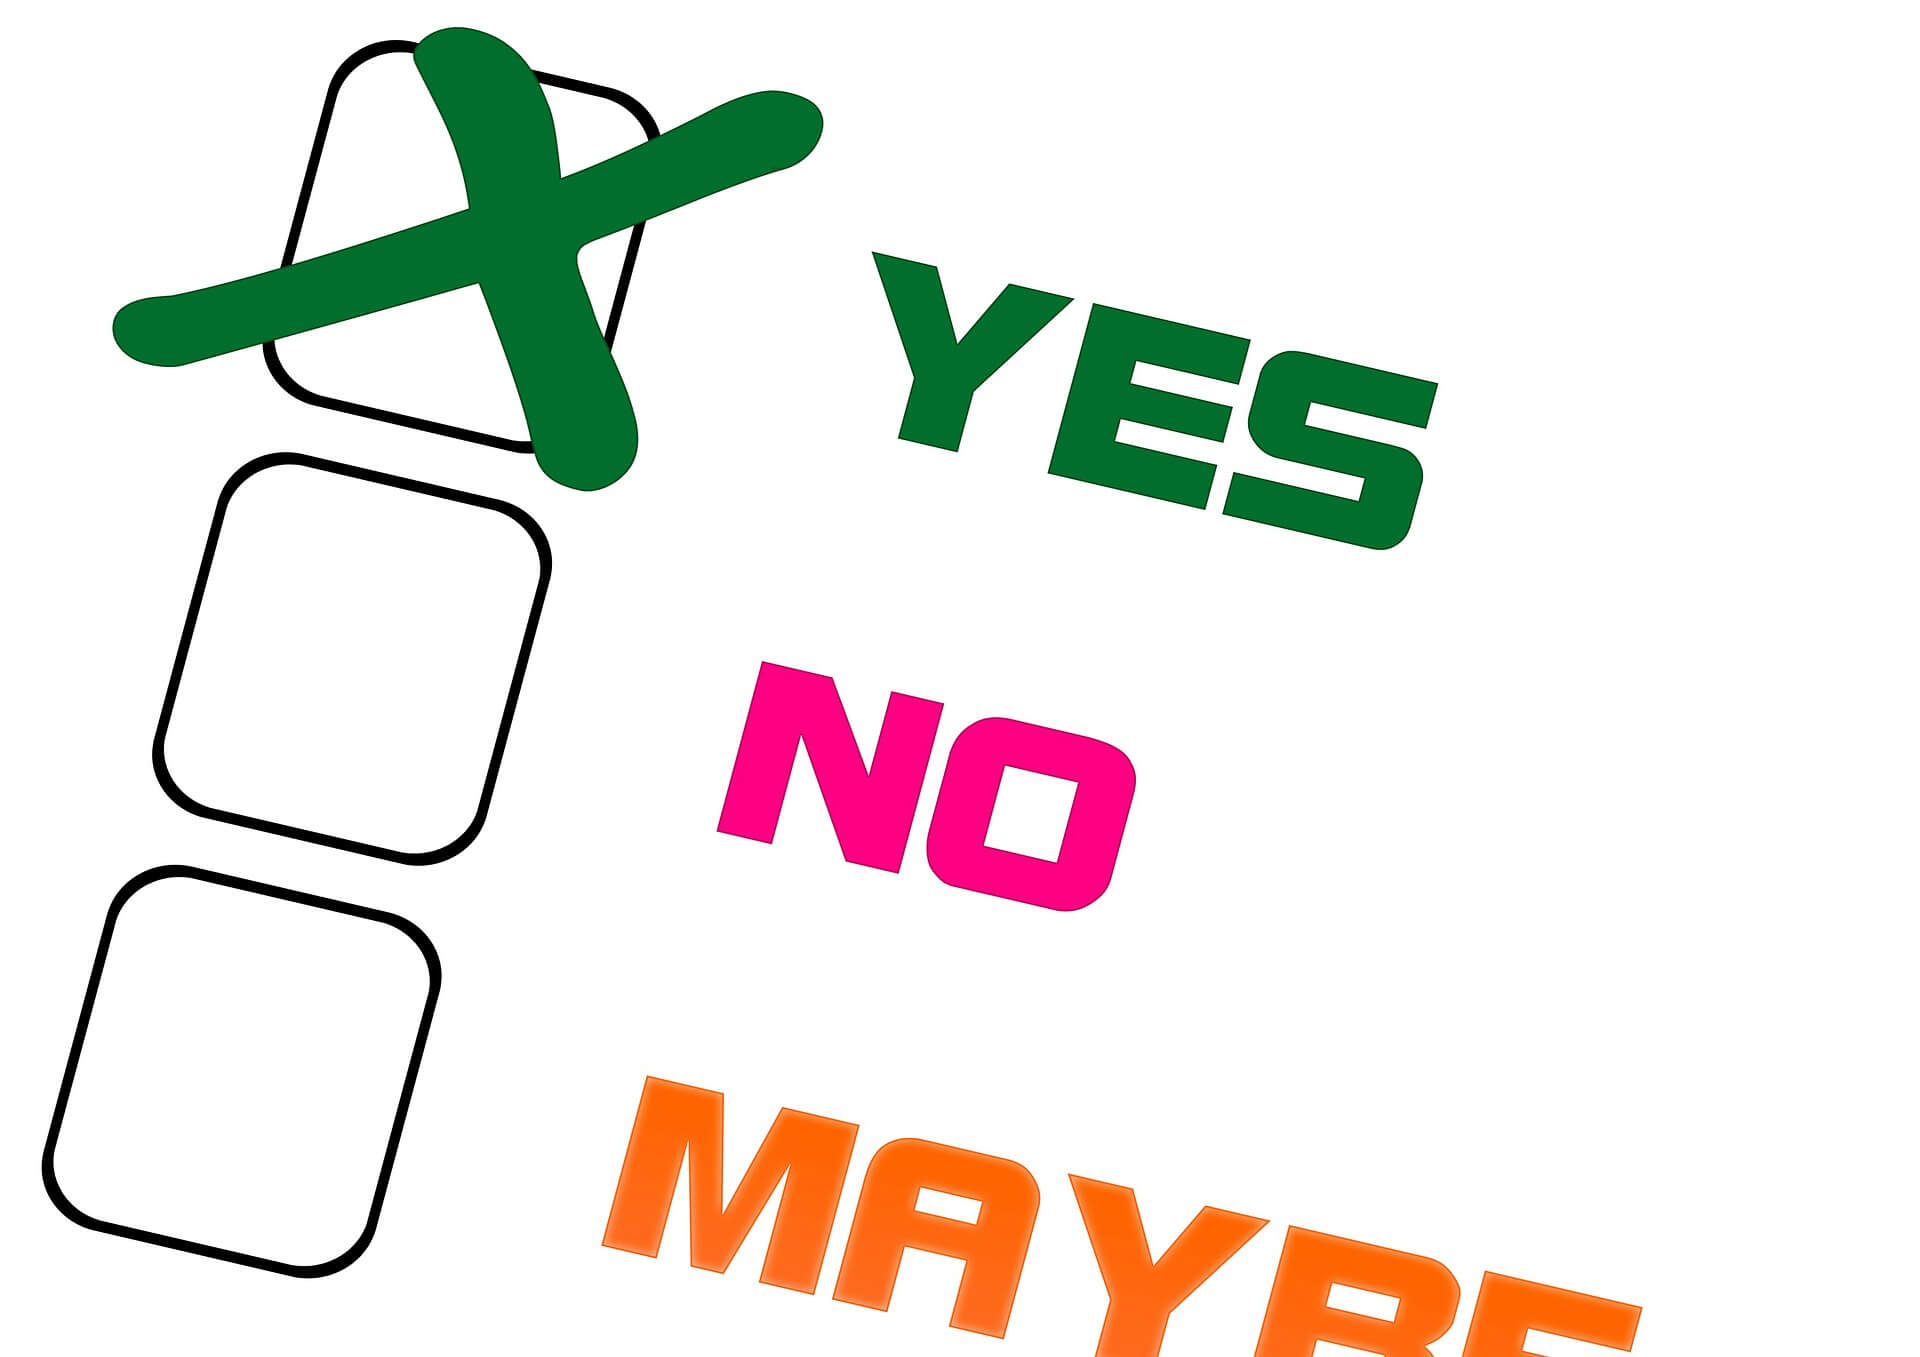 A questionnaire with "Yes" "No" and "Maybe" answers, where the "Yes" answer has an X in the box.